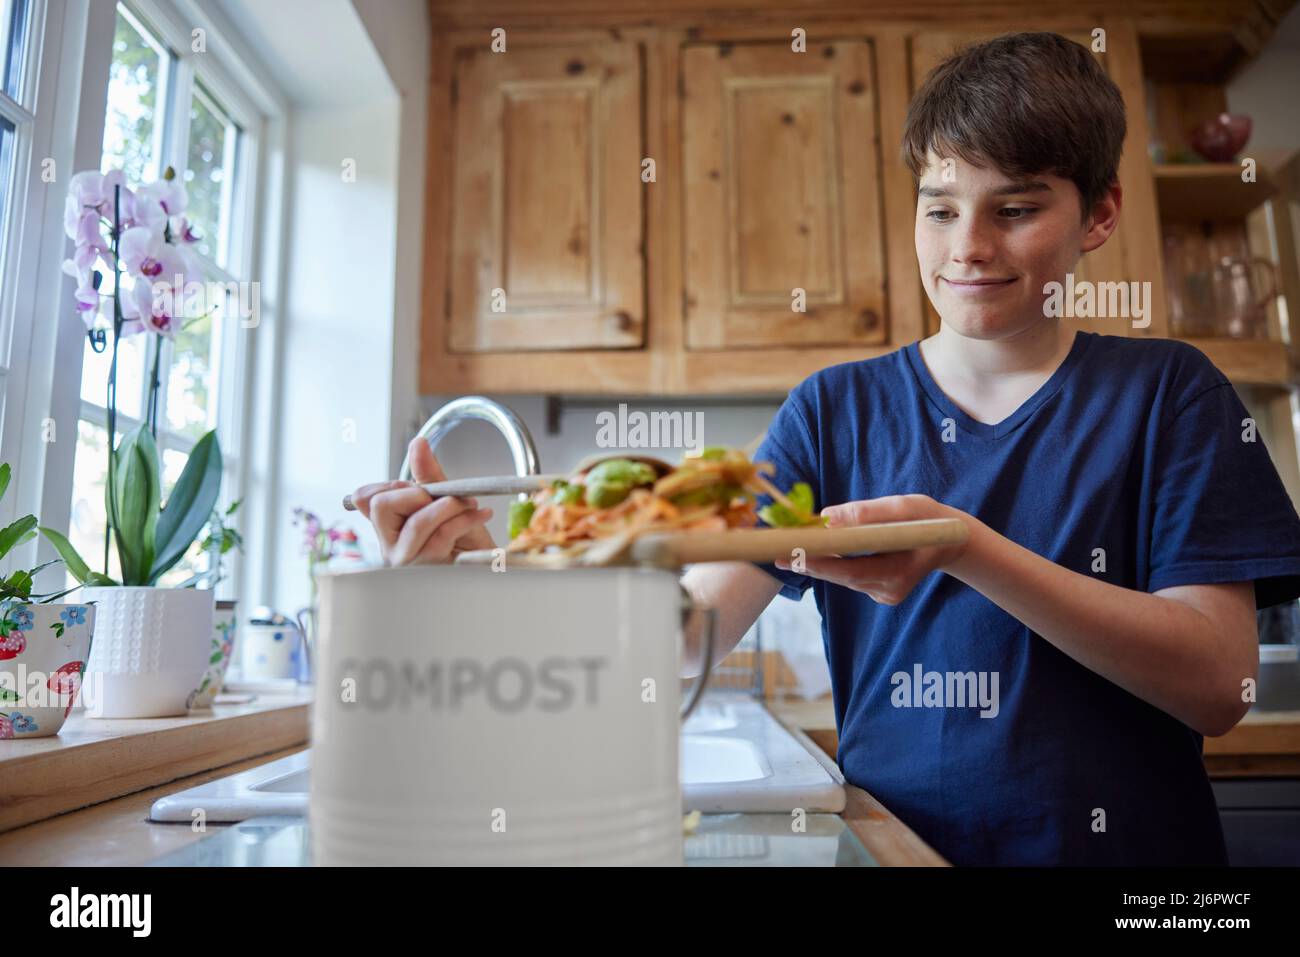 Boy In Kitchen Making Compost Scraping Vegetable Leftovers Into Bin Stock Photo